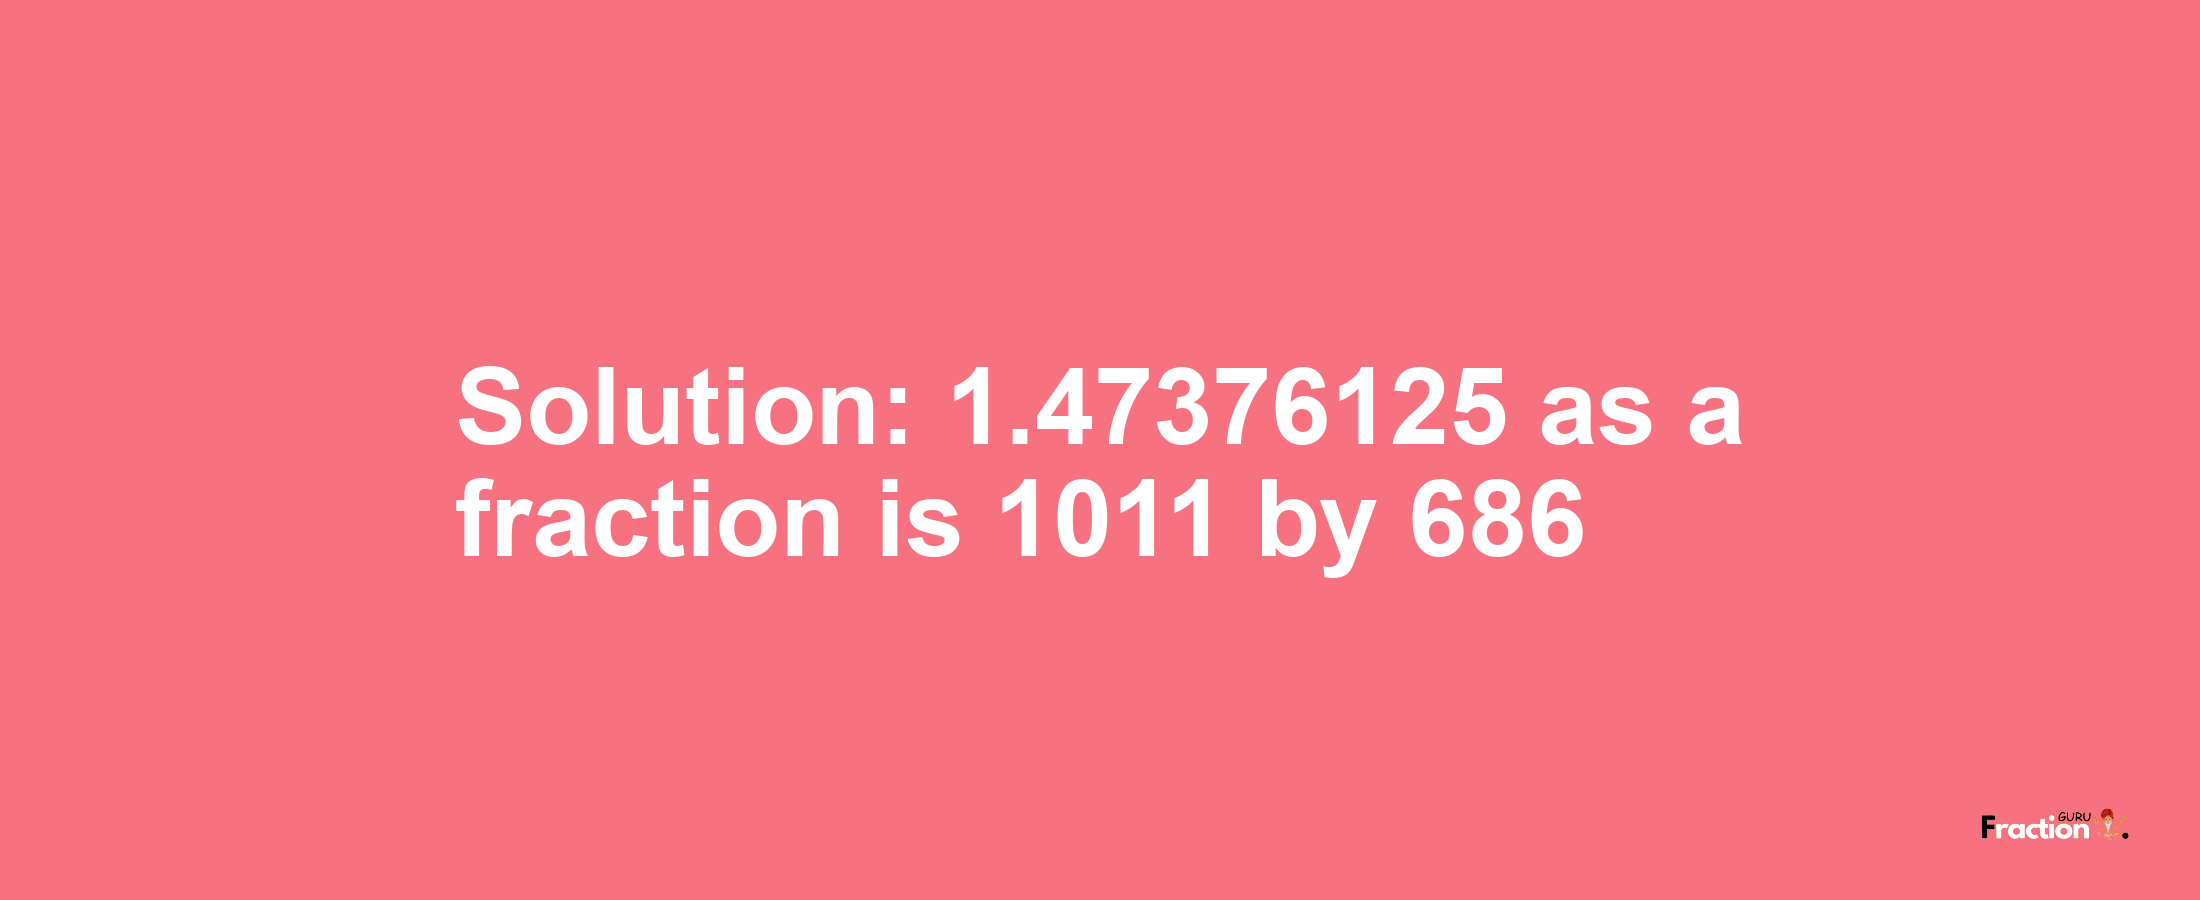 Solution:1.47376125 as a fraction is 1011/686